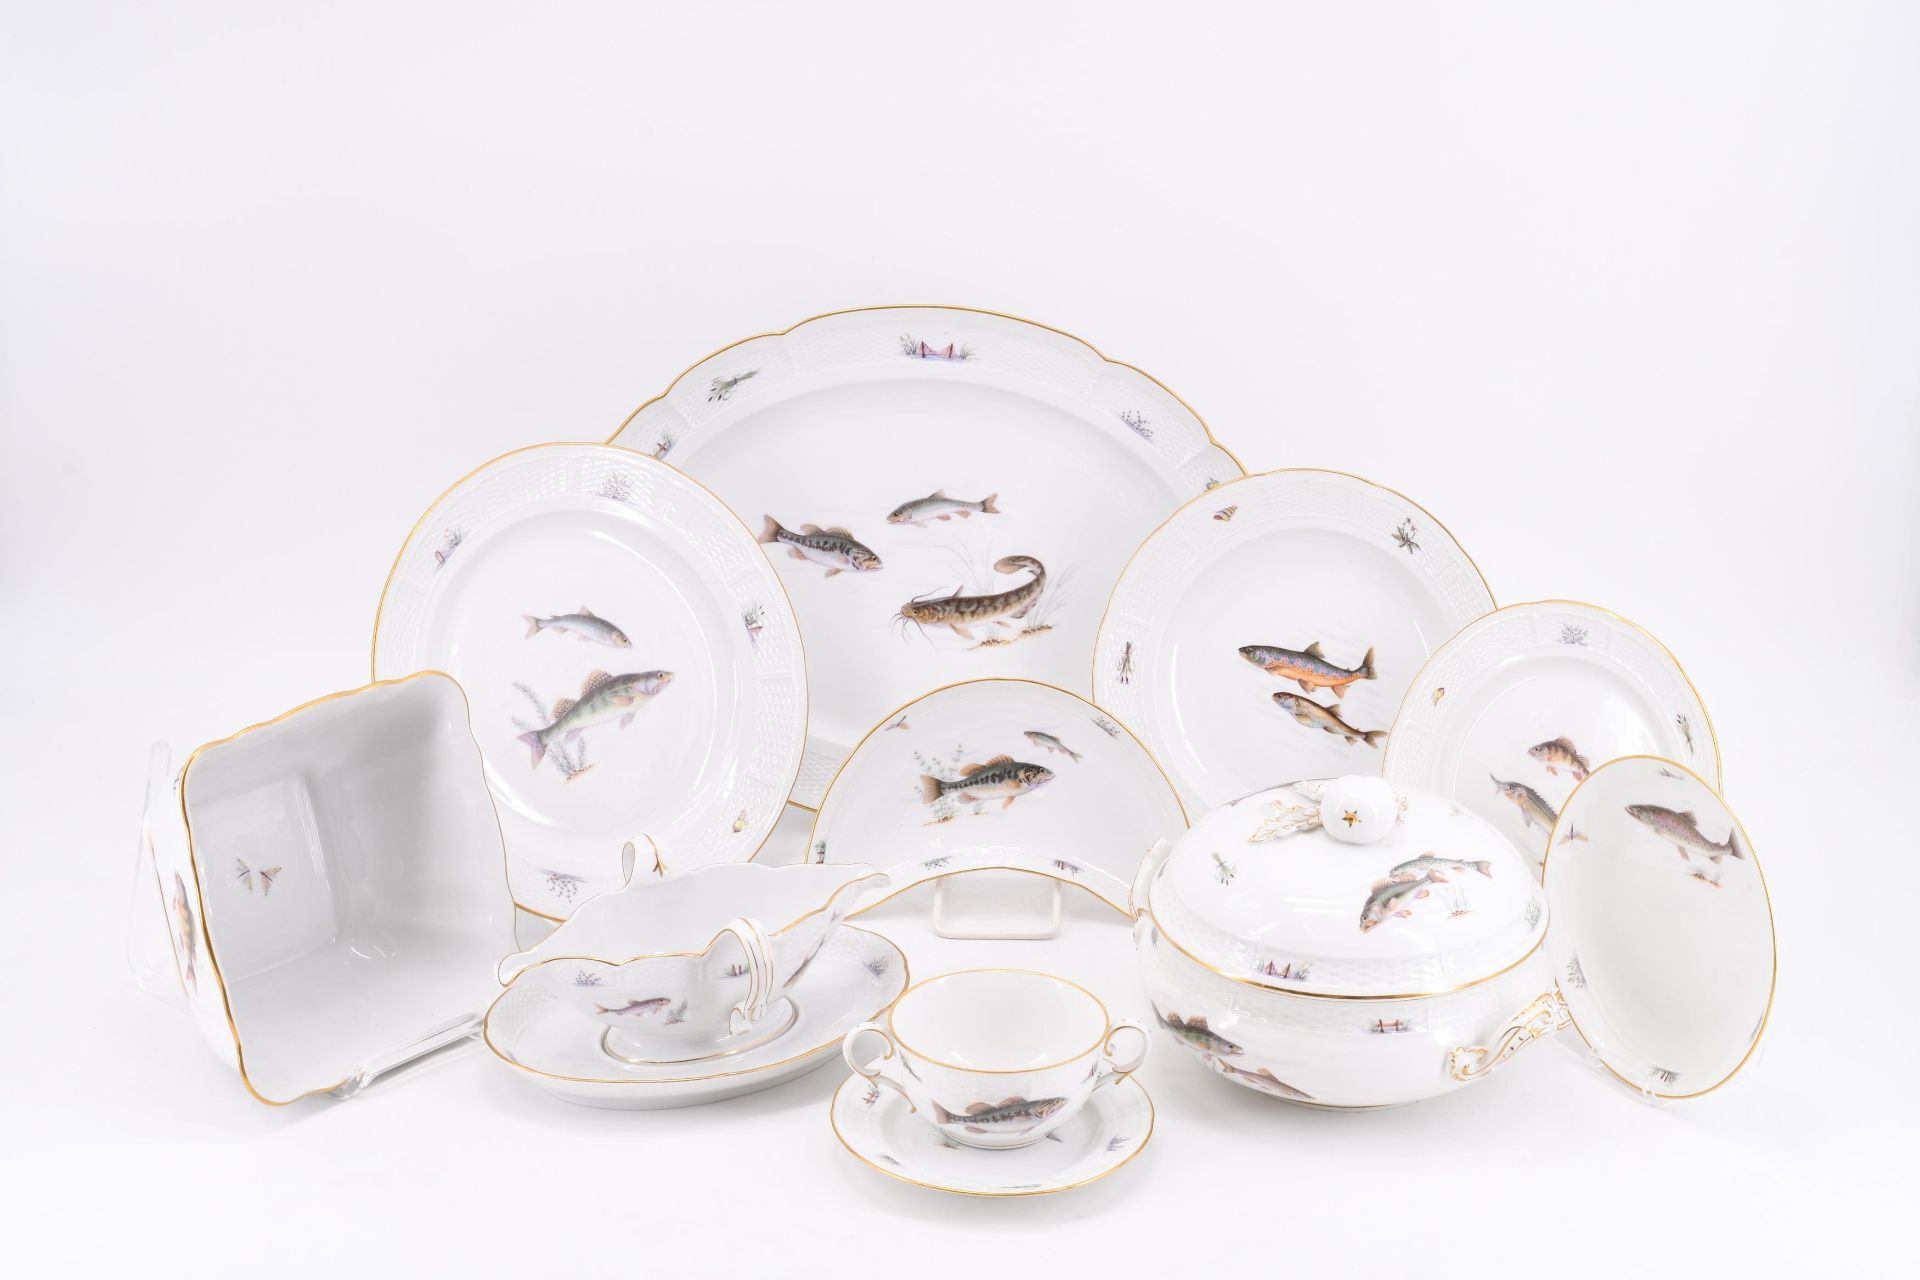 Dinner service with fish decor for 6 persons - Image 2 of 27